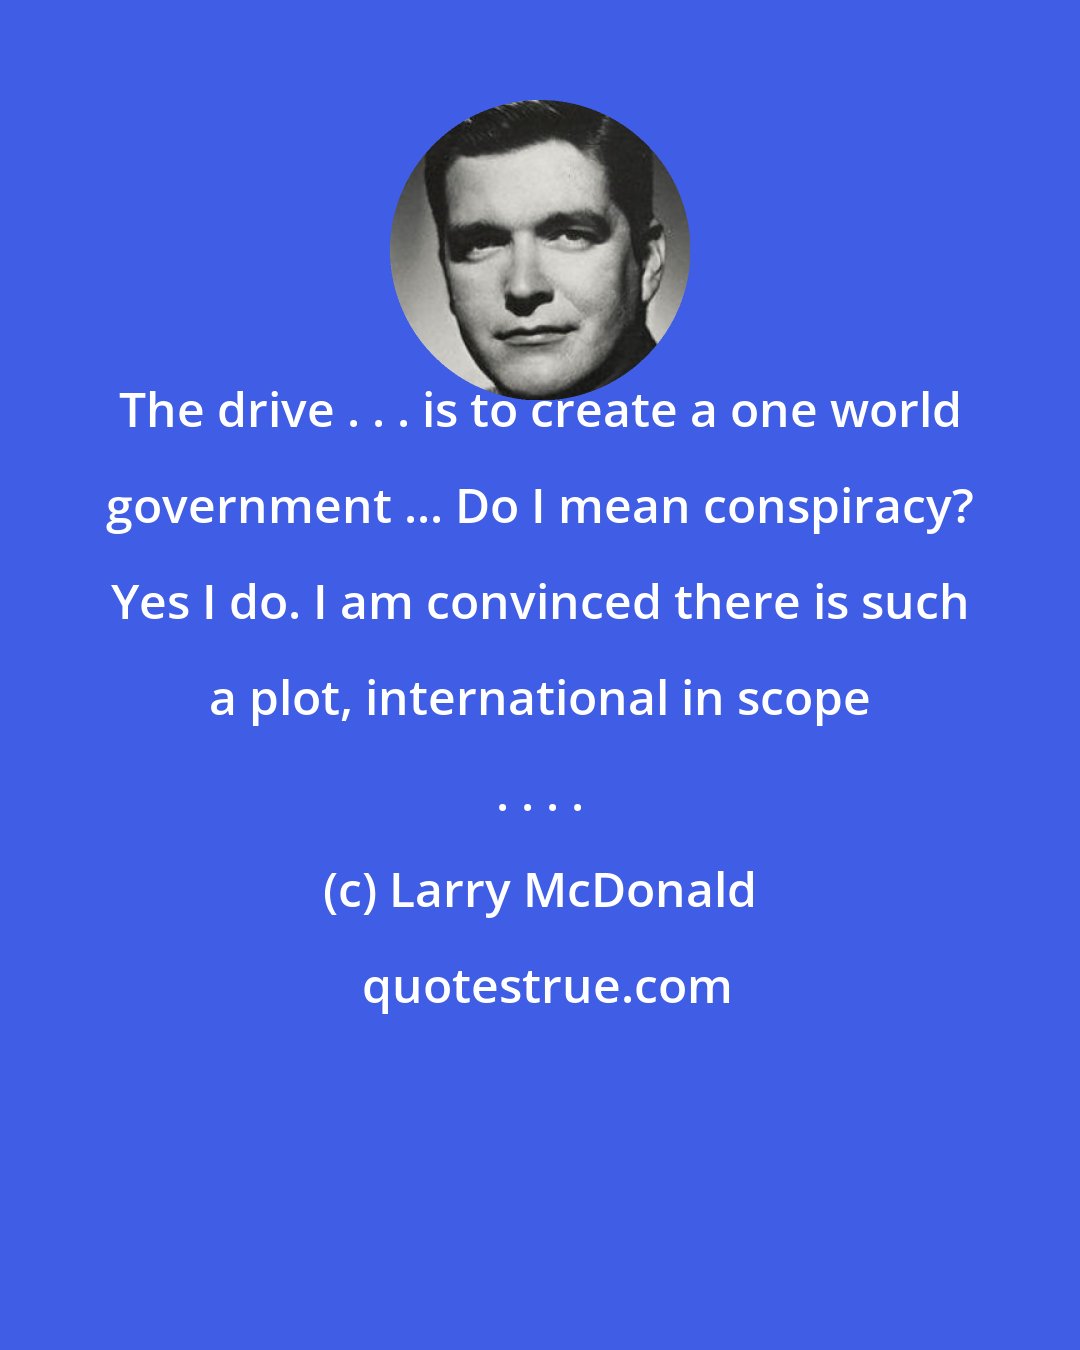 Larry McDonald: The drive . . . is to create a one world government ... Do I mean conspiracy? Yes I do. I am convinced there is such a plot, international in scope . . . .